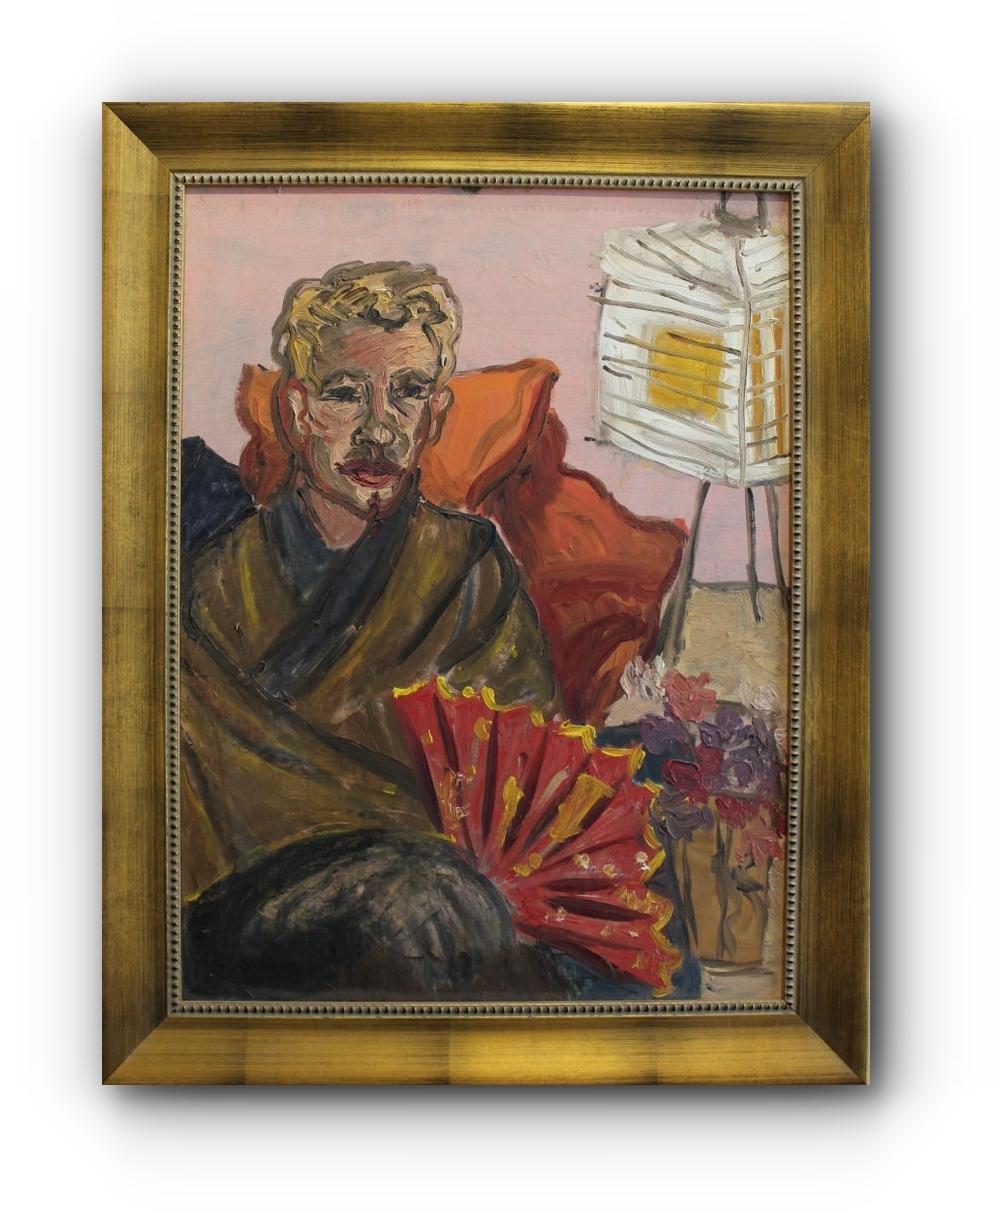 Janet Bosse Figurative Painting - "Man With a Red Fan" - Mid-Century Impressionist Portrait